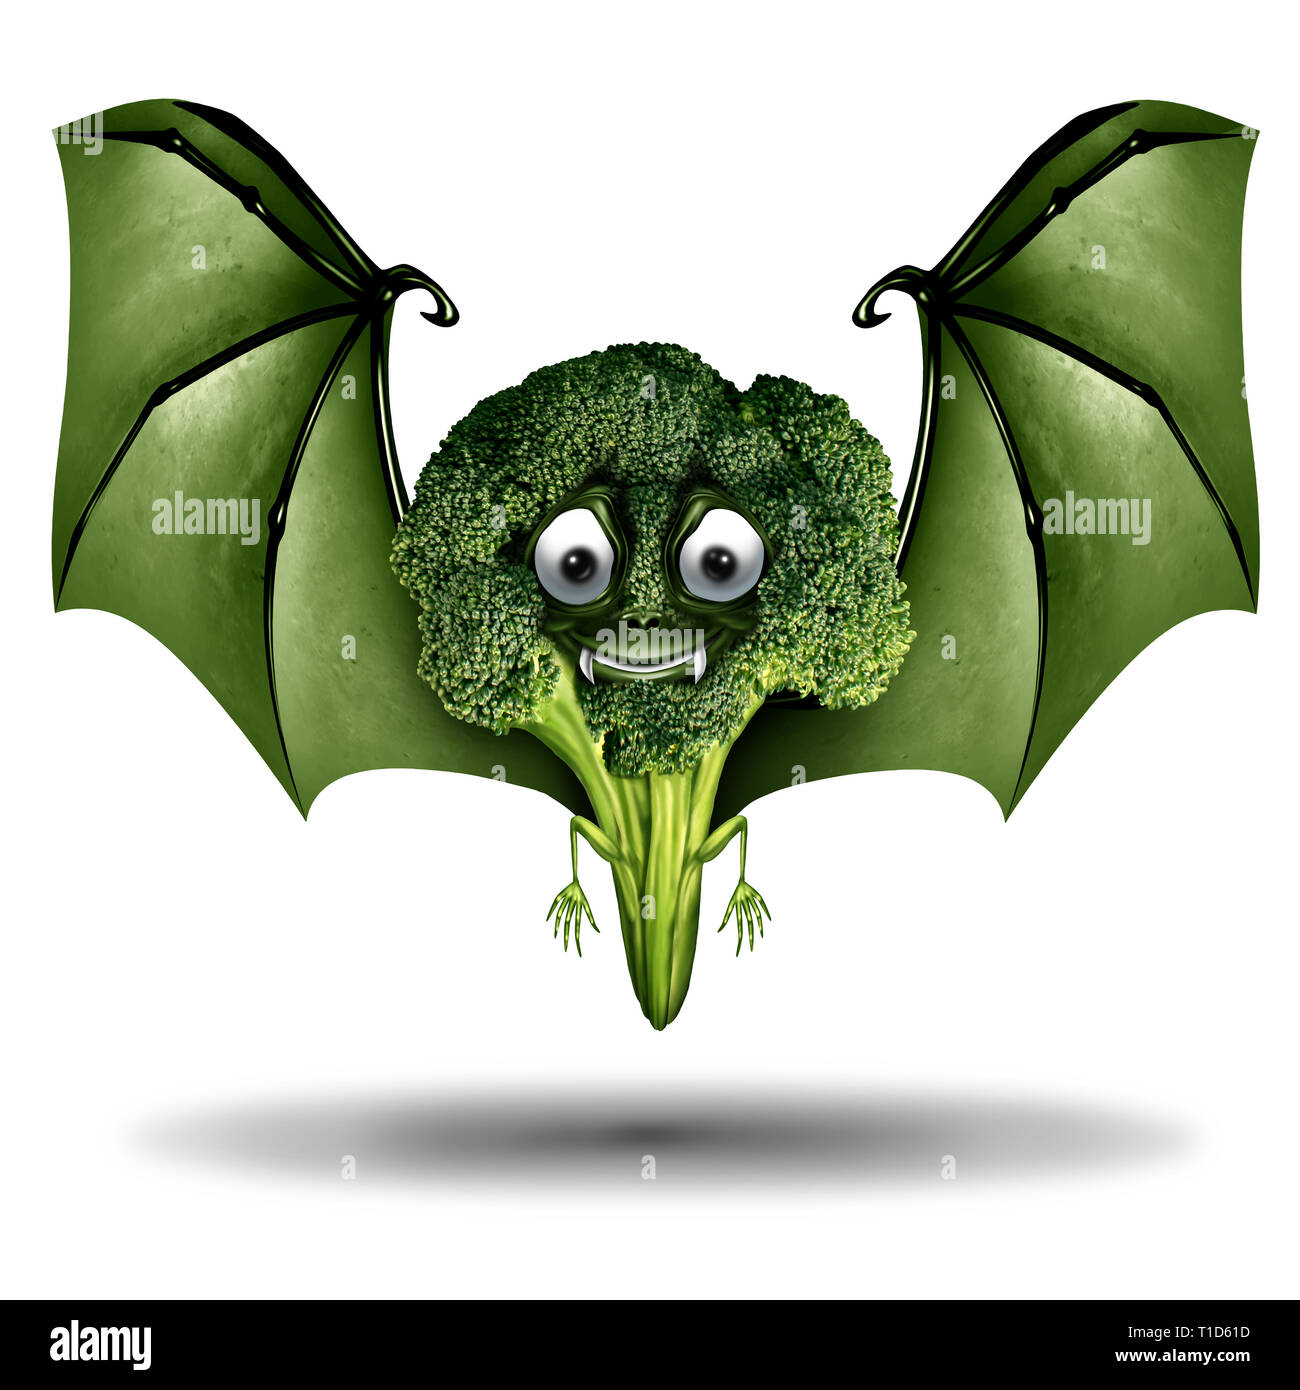 Cute scary broccoli character as a funny vegetable or genetically modified organism as a GMO or hybrid concept with 3D illustration elements. Stock Photo